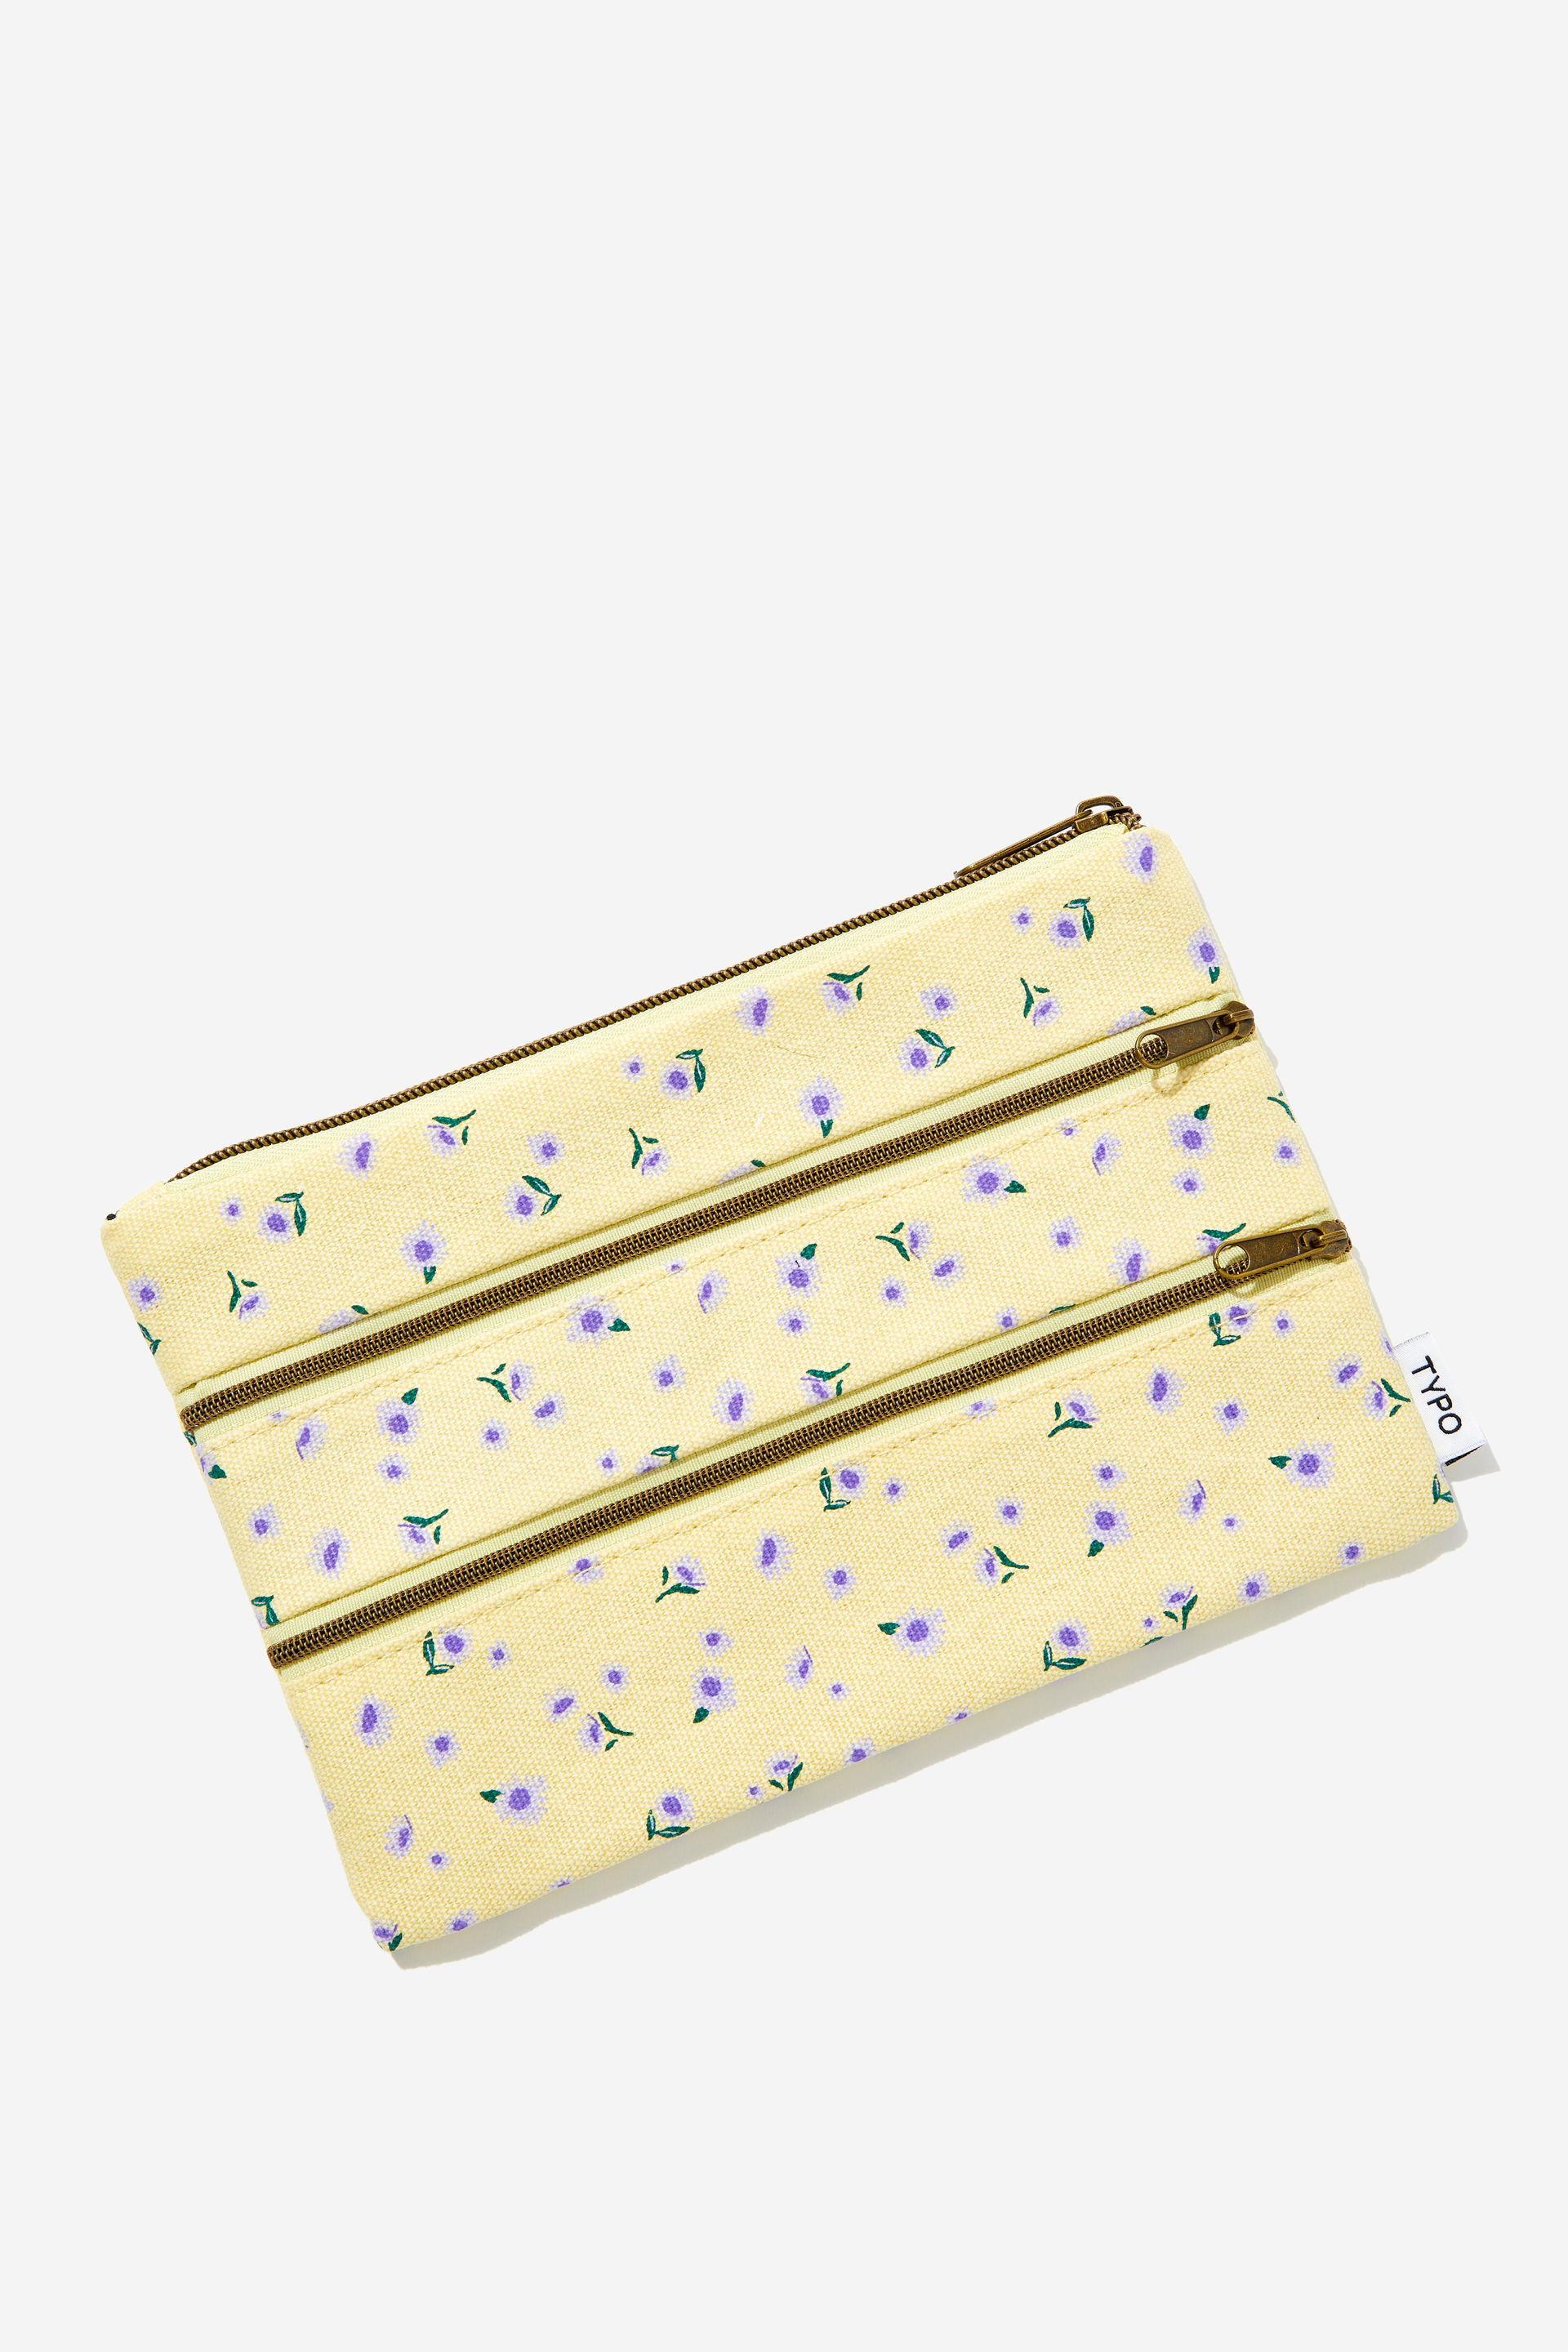 Typo - Double Campus Pencil Case - Daisy ditsy butter